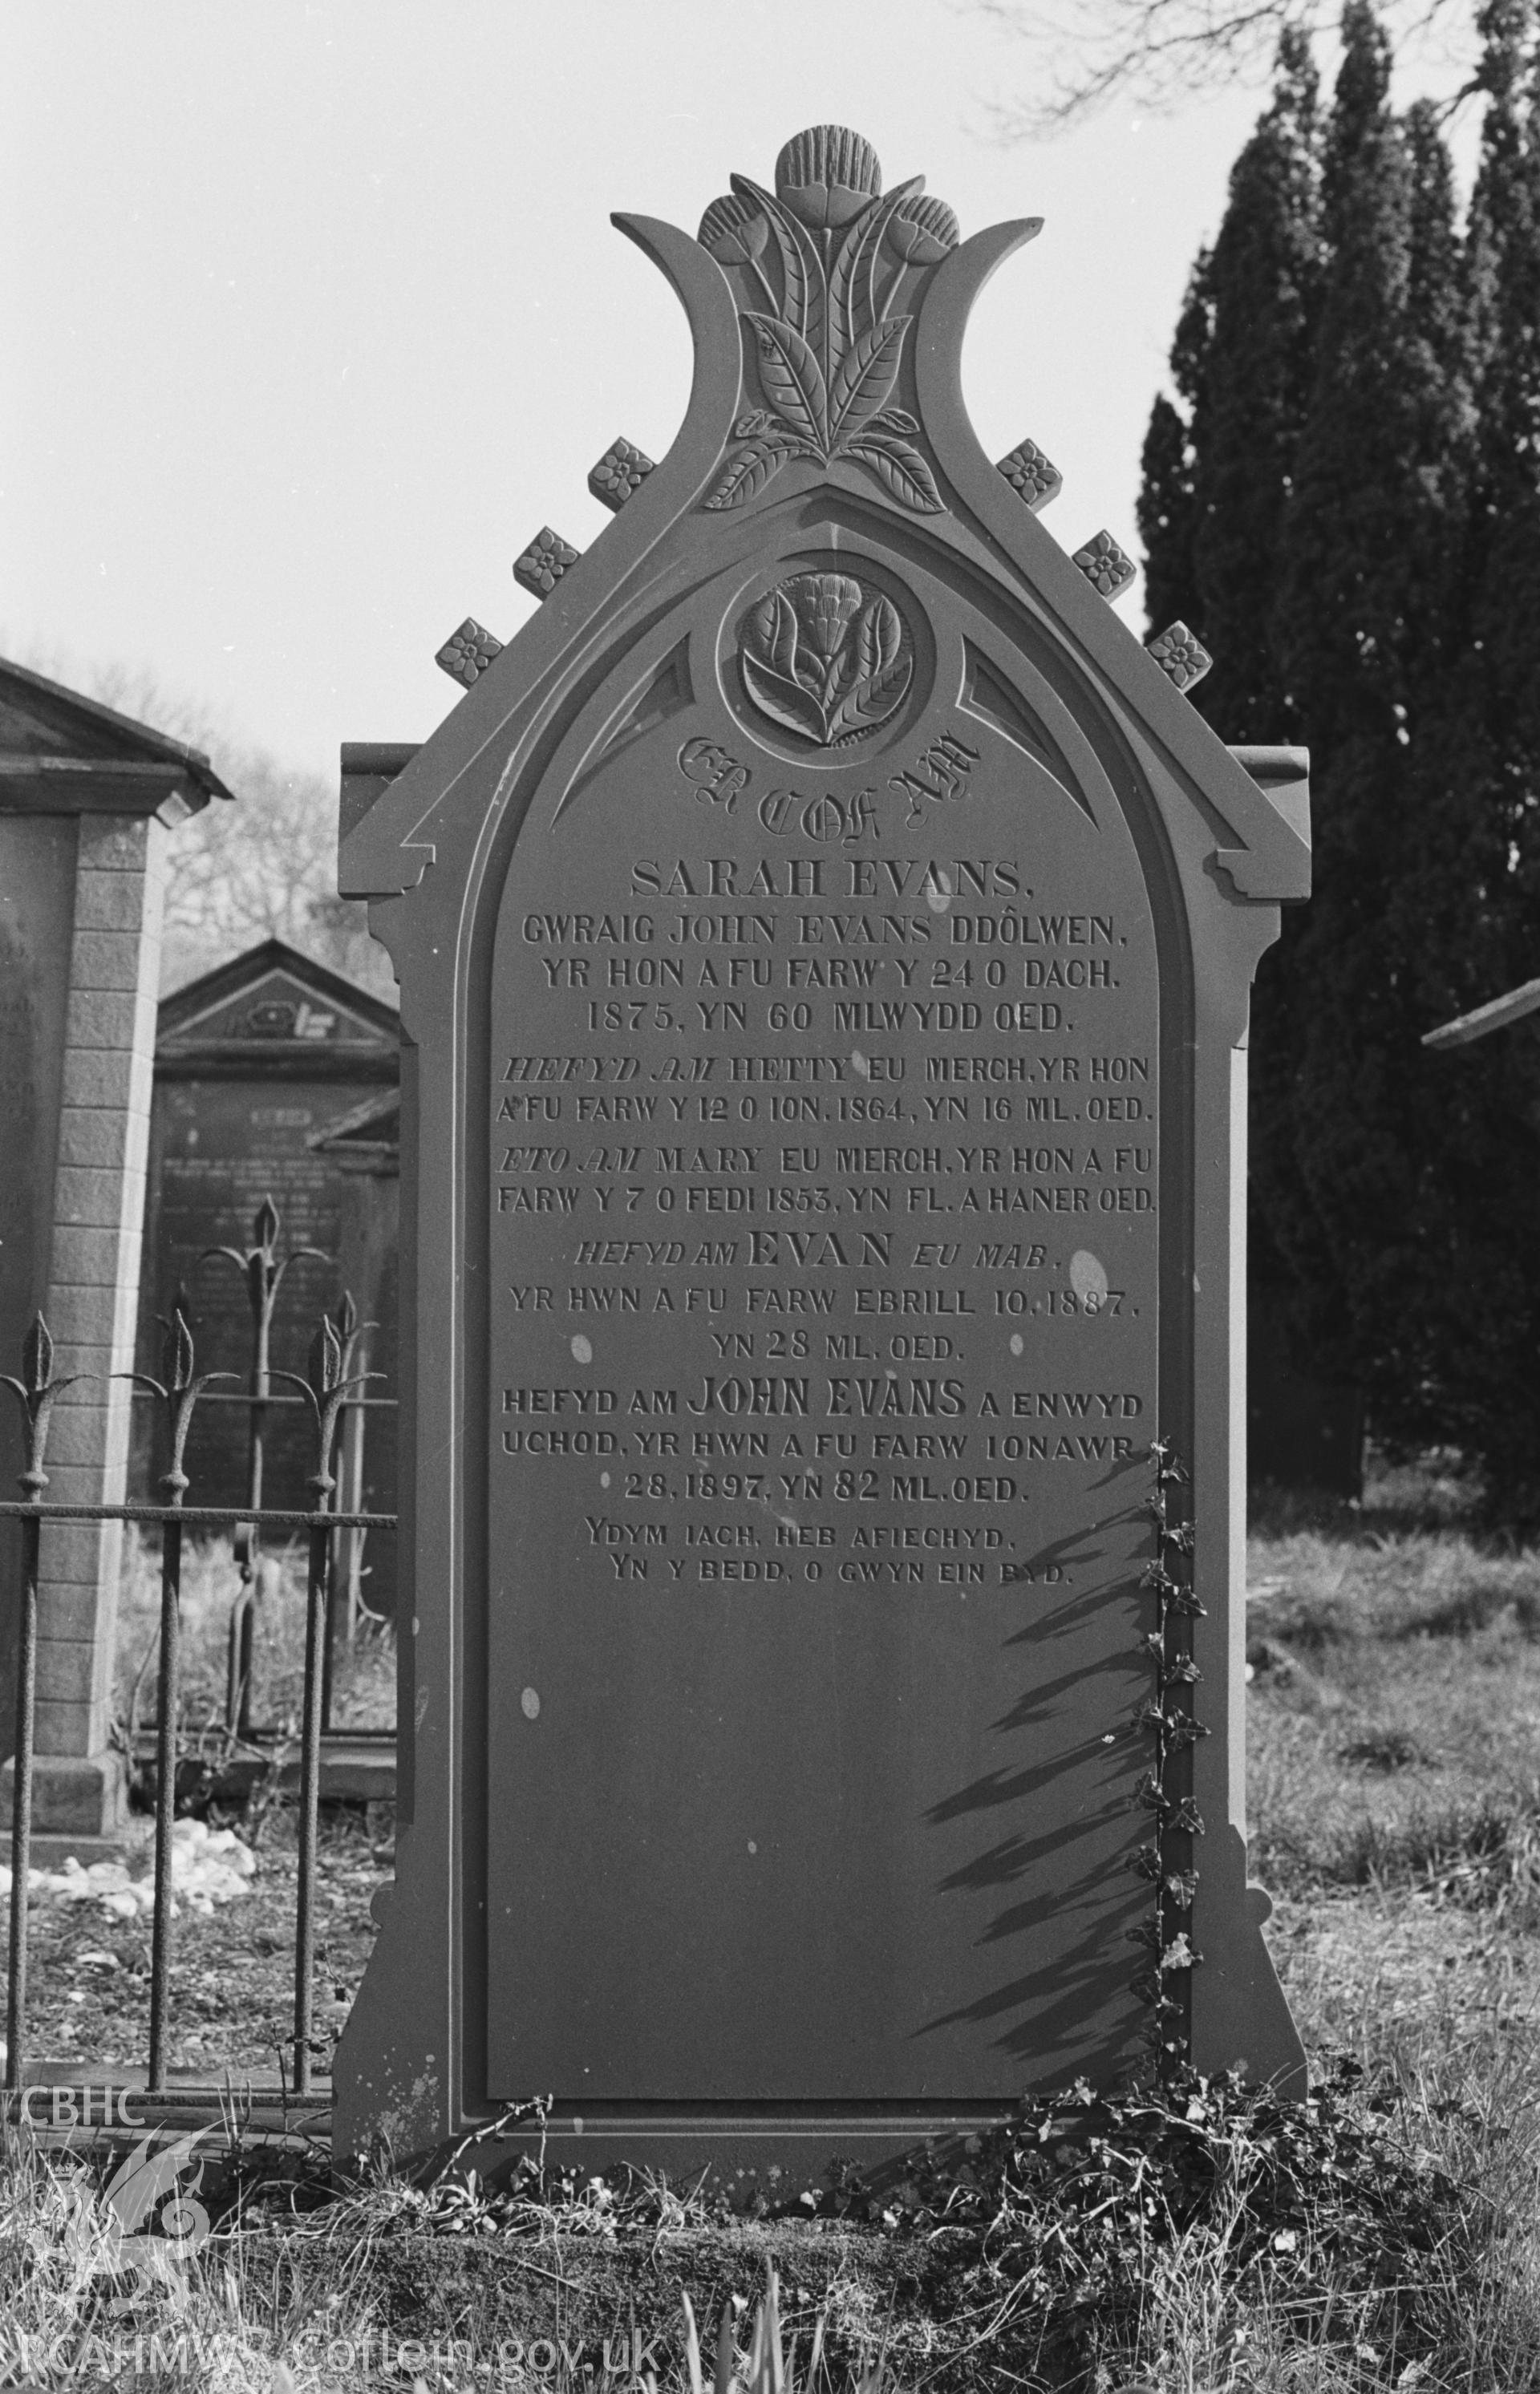 Digital copy of a black and white negative showing the Evans' family gravestone, Pensarn Welsh Calvinistic Methodist chapel, Hafod Iwan, Caerwedros. Photographed by Arthur O. Chater on 11th April 1968 from Grid Reference SN 381 548.